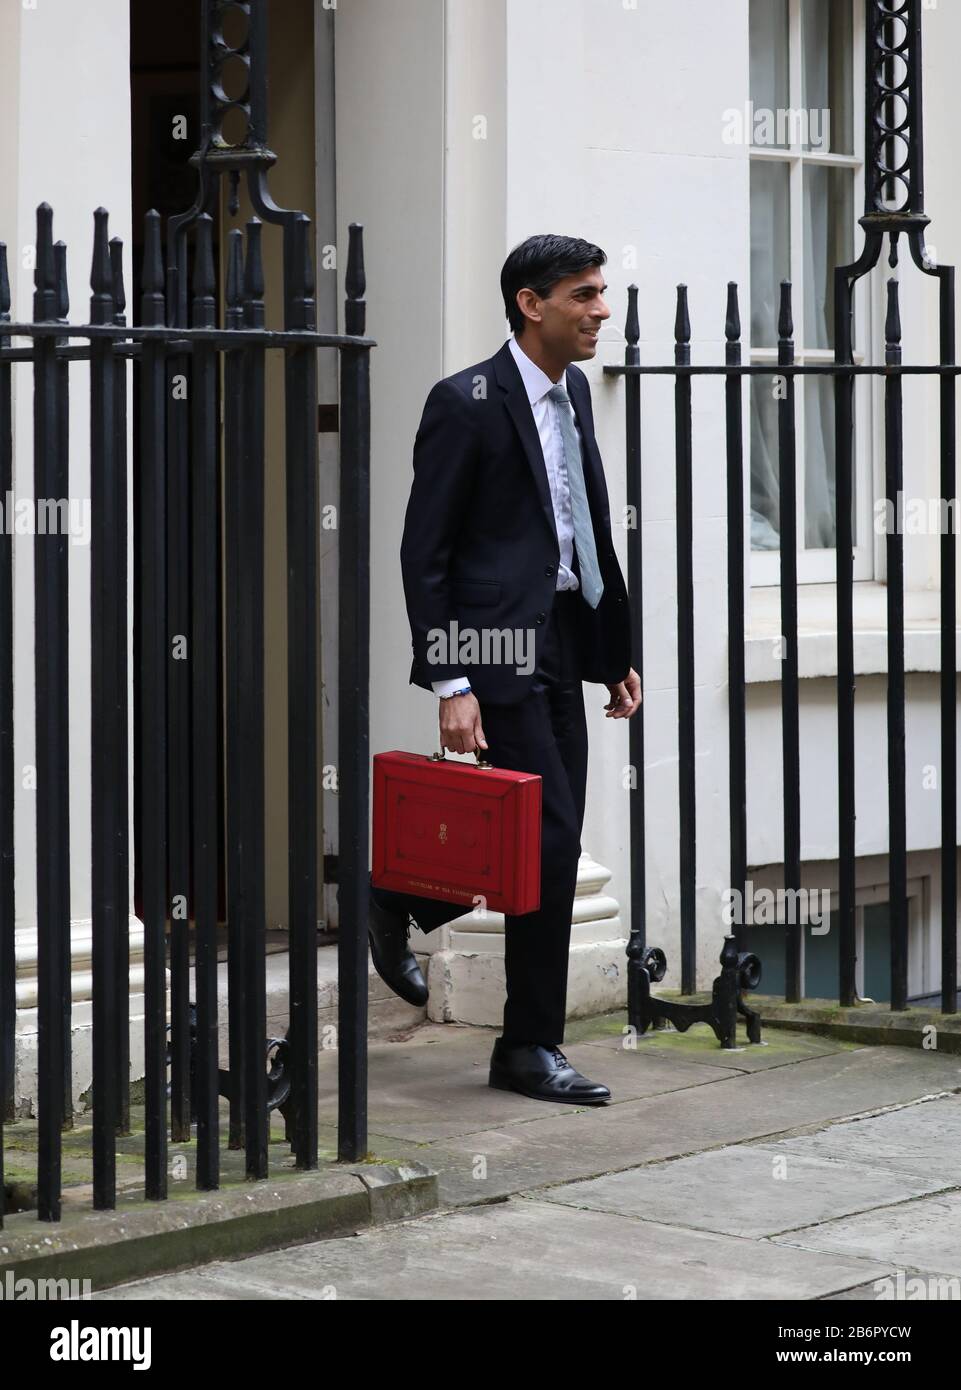 London, UK. 11th Mar, 2020. Rishi Sunak the Chancellor of the Exchequer stands outside Number 11 Downing Street before he delivers his Budget speech in The House of Commons at lunchtime. Budget Day, Downing Street, Westminster, London, March 11, 2020. Credit: Paul Marriott/Alamy Live News Stock Photo